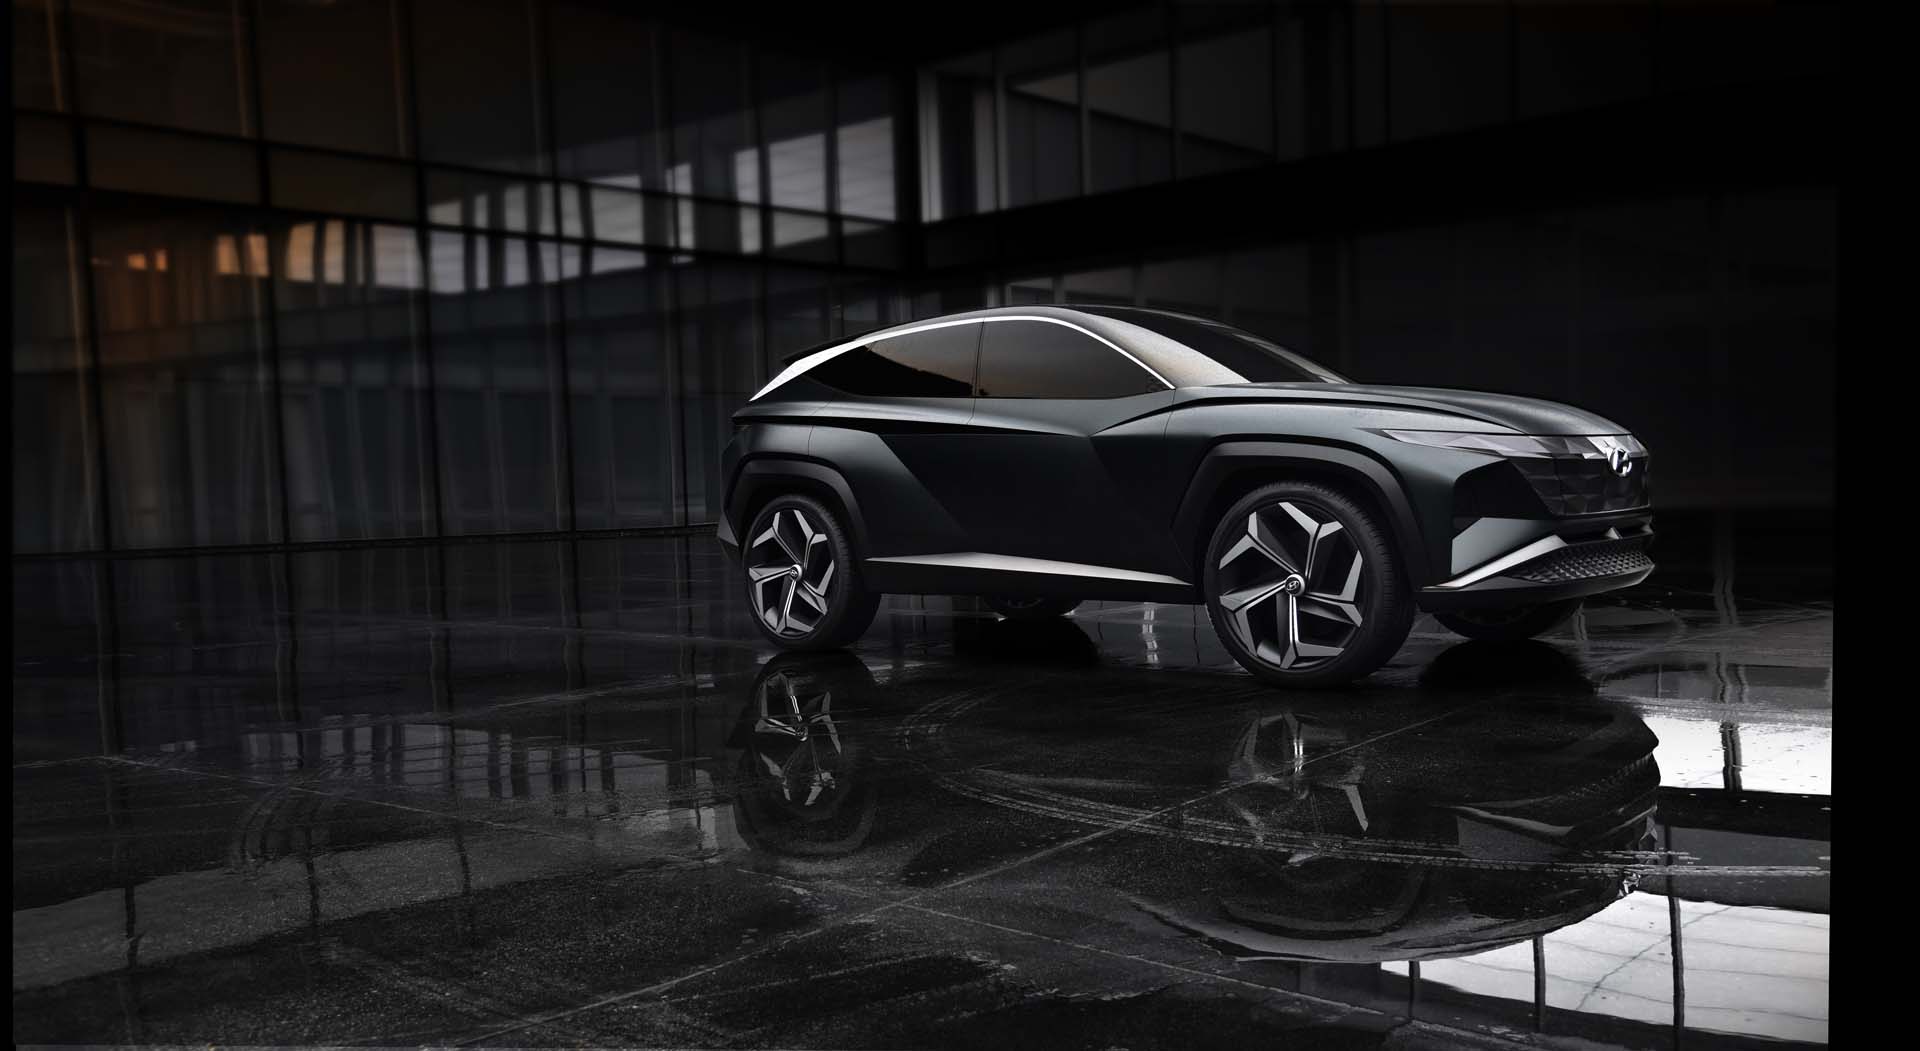 Vision-T is the next Hyundai Tucson, with concept plug-in hybrid